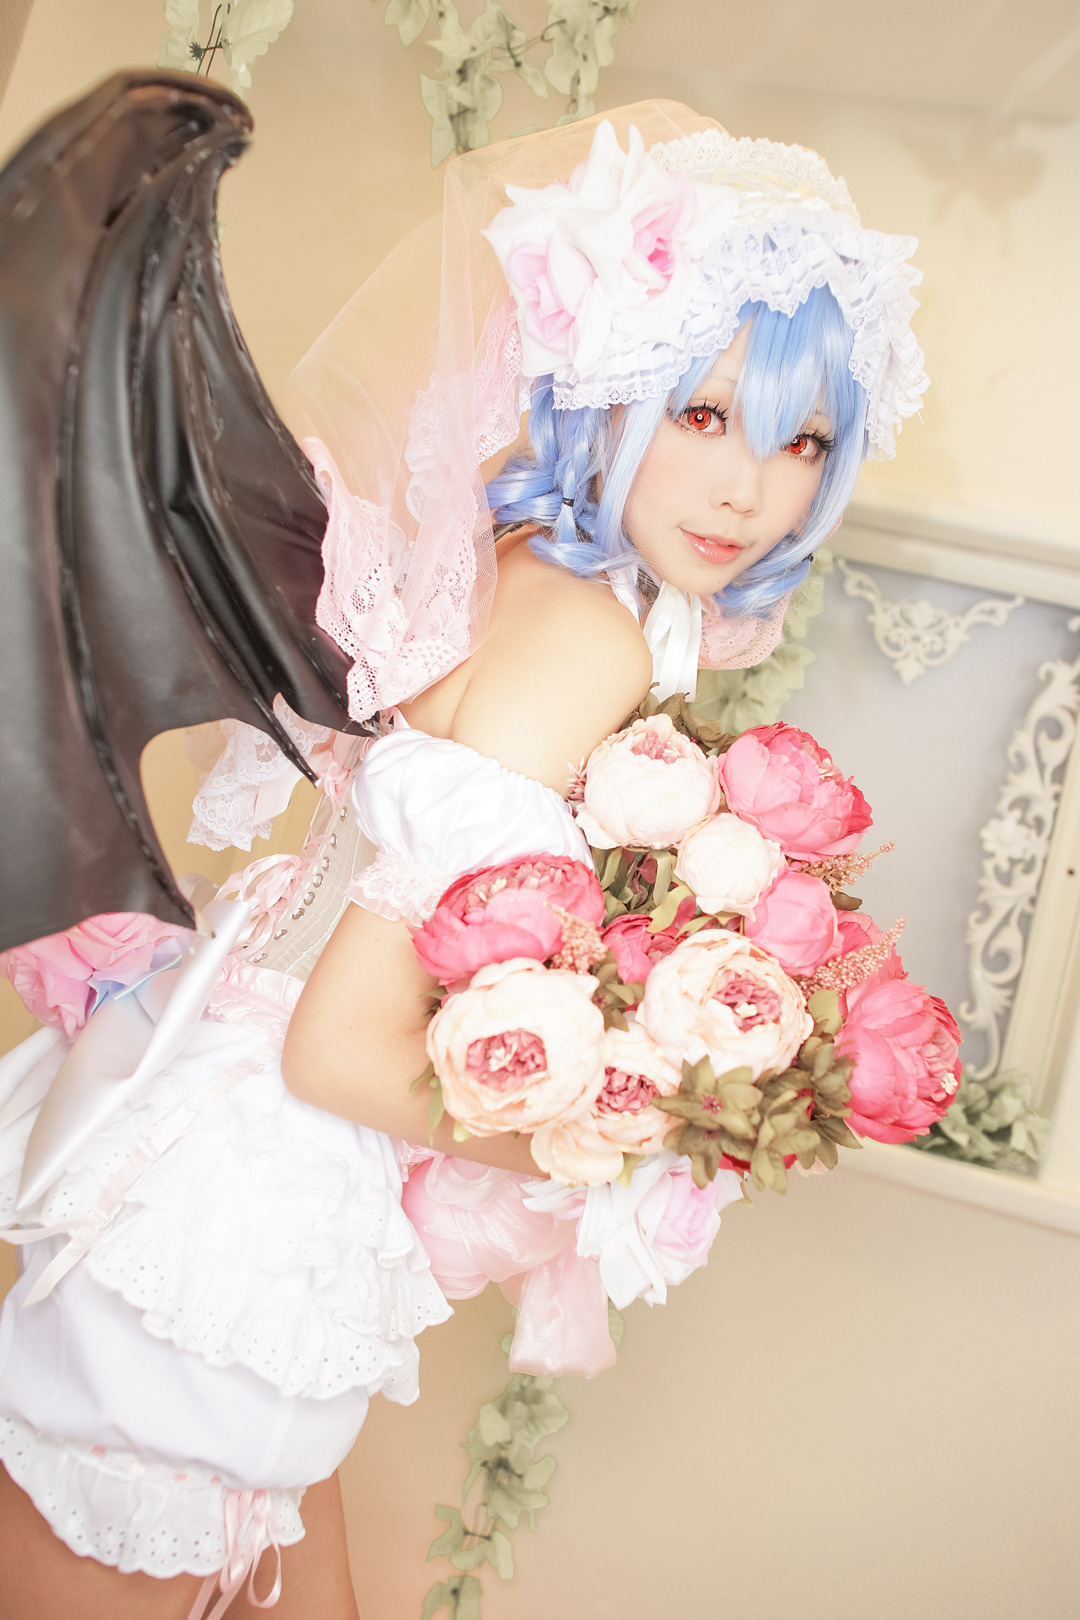 Touhou Project - Remilia Scarlet (Ely) 8HELP US GROW Like,Comment &amp; Share.CosplayJapaneseGirls1.5